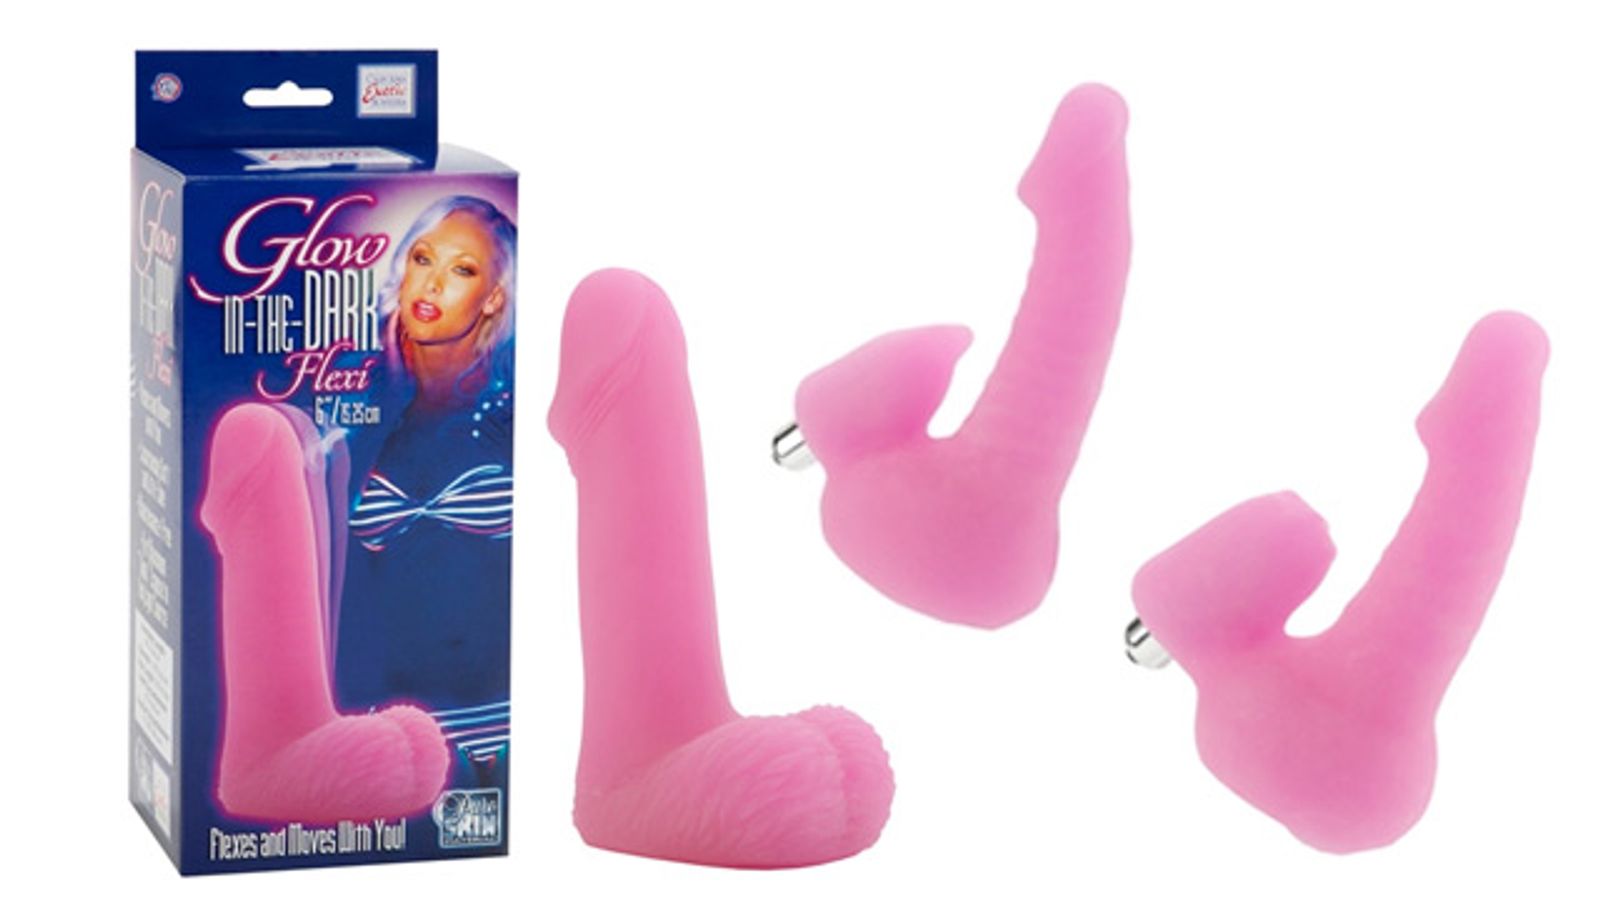 California Exotic Novelties Releases New Glow-in-the-Darks